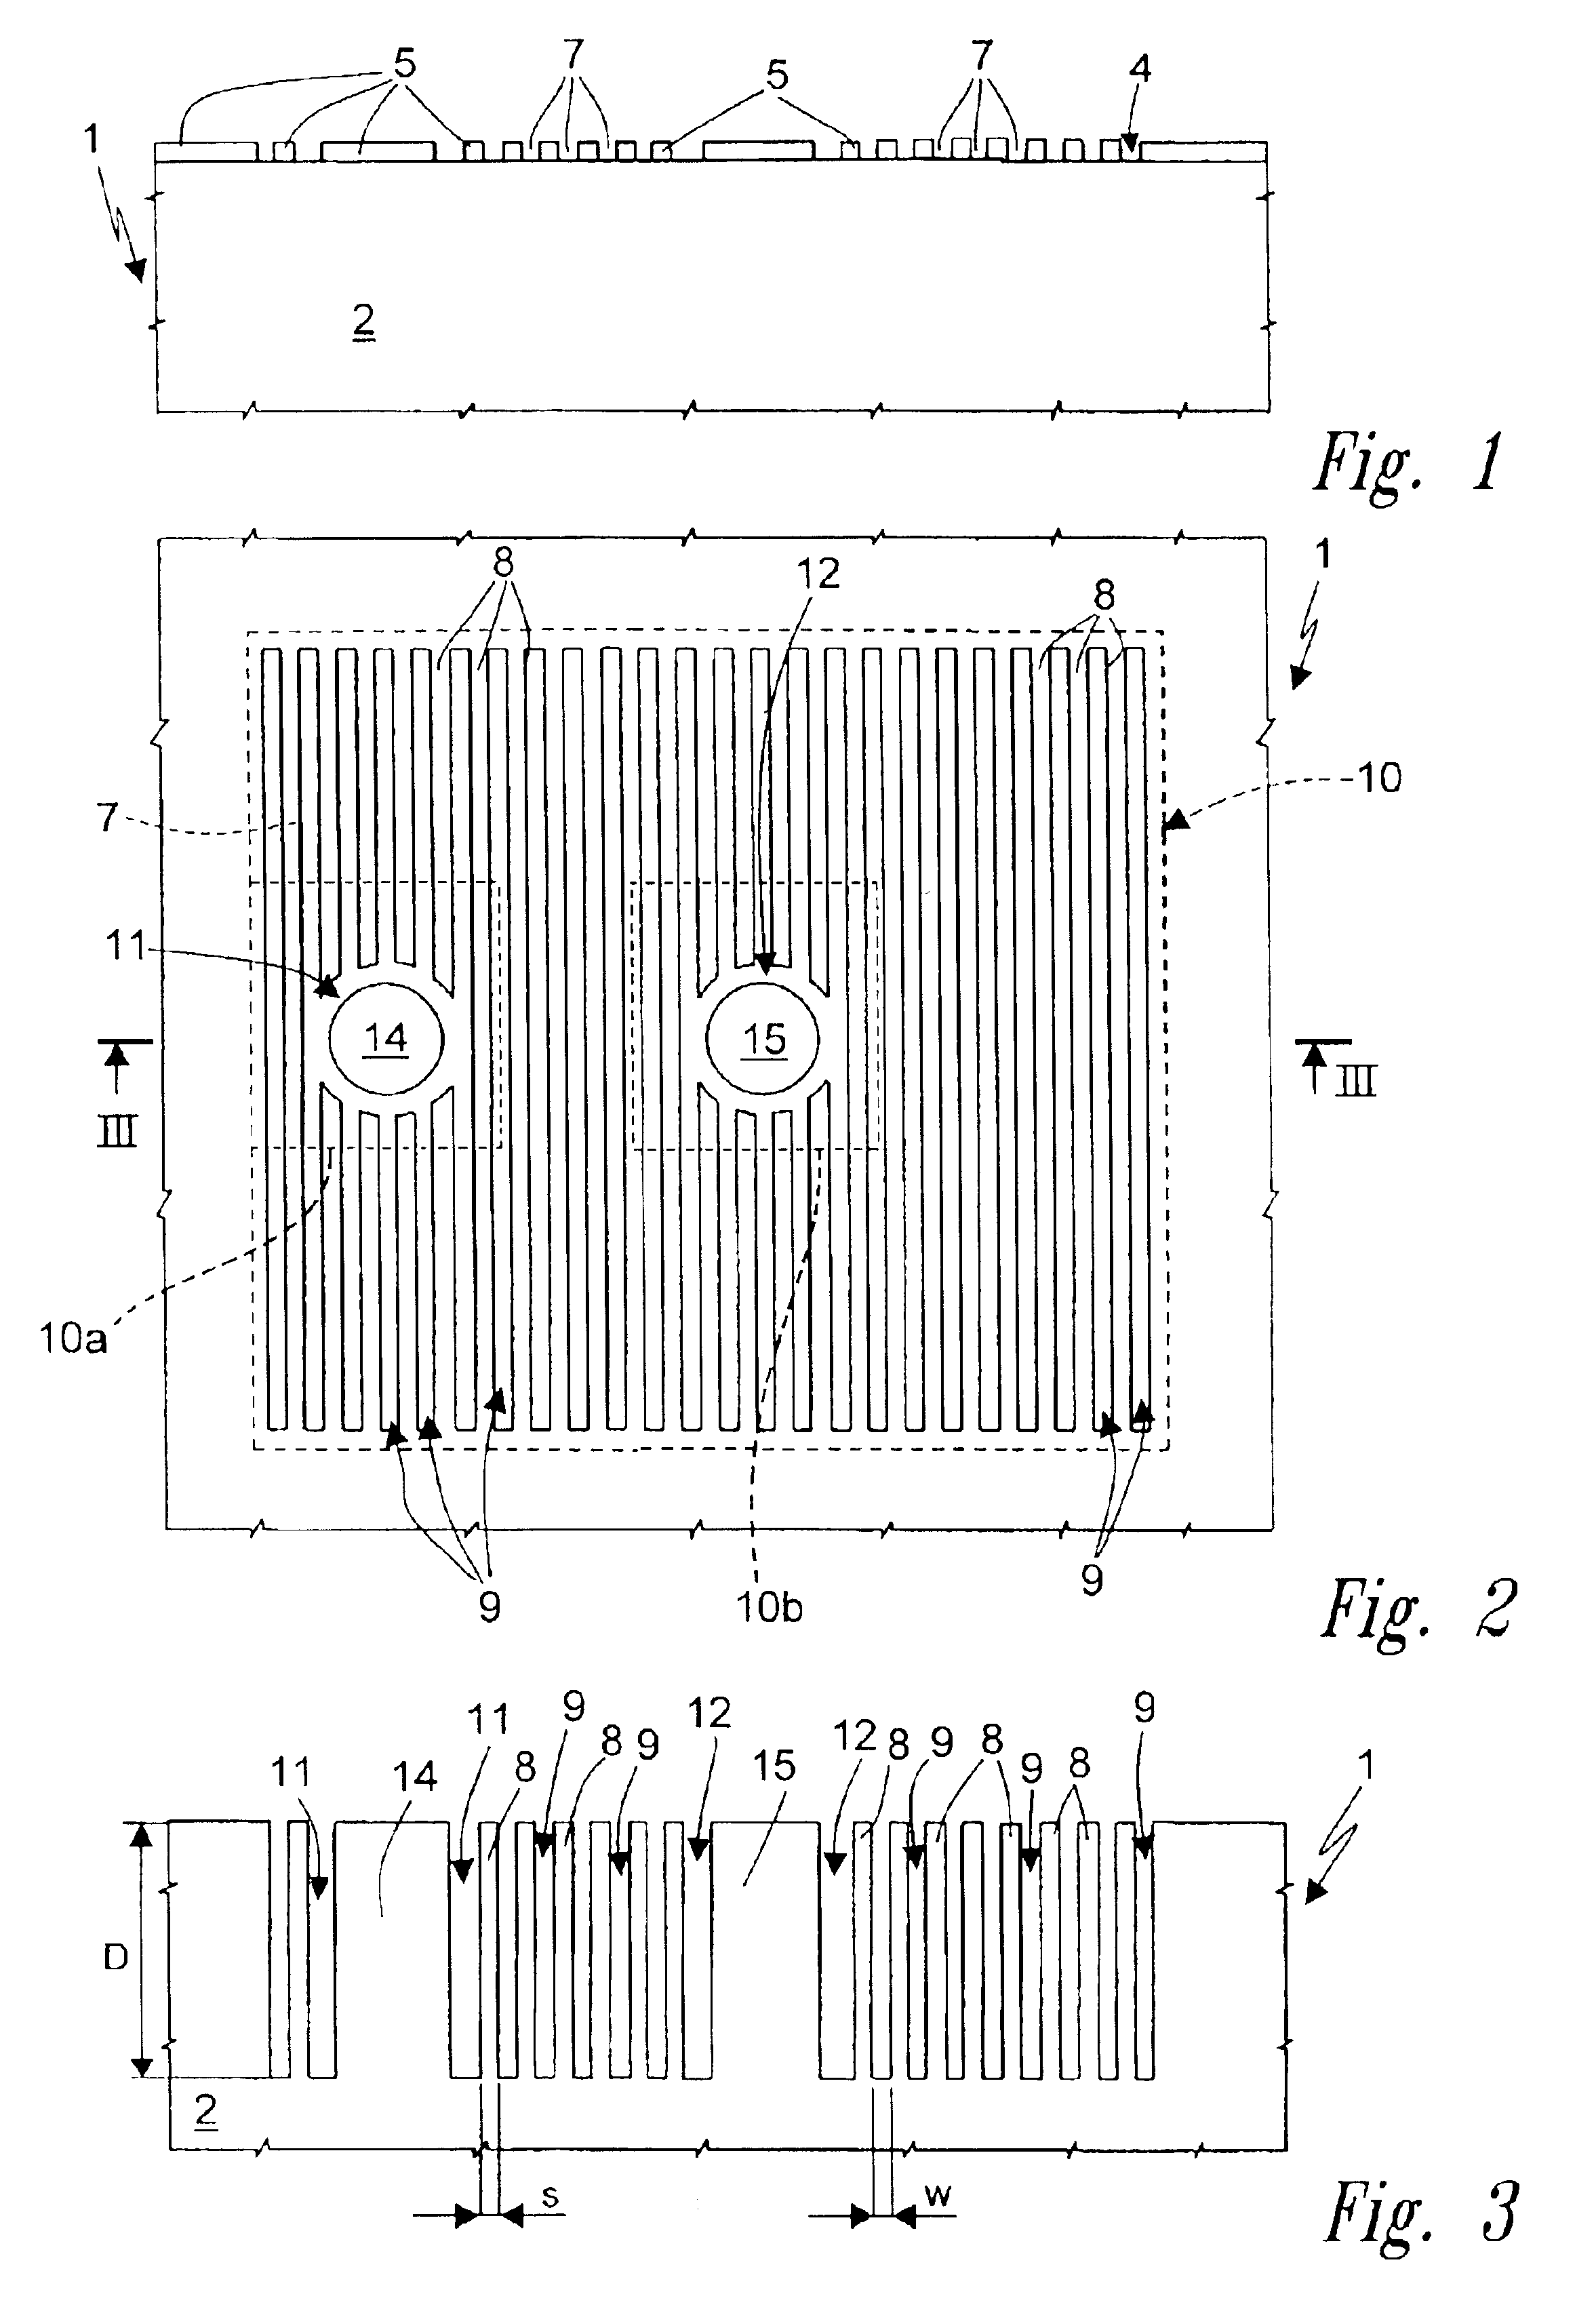 Process for manufacturing a semiconductor wafer integrating electronic devices and a structure for electromagnetic decoupling